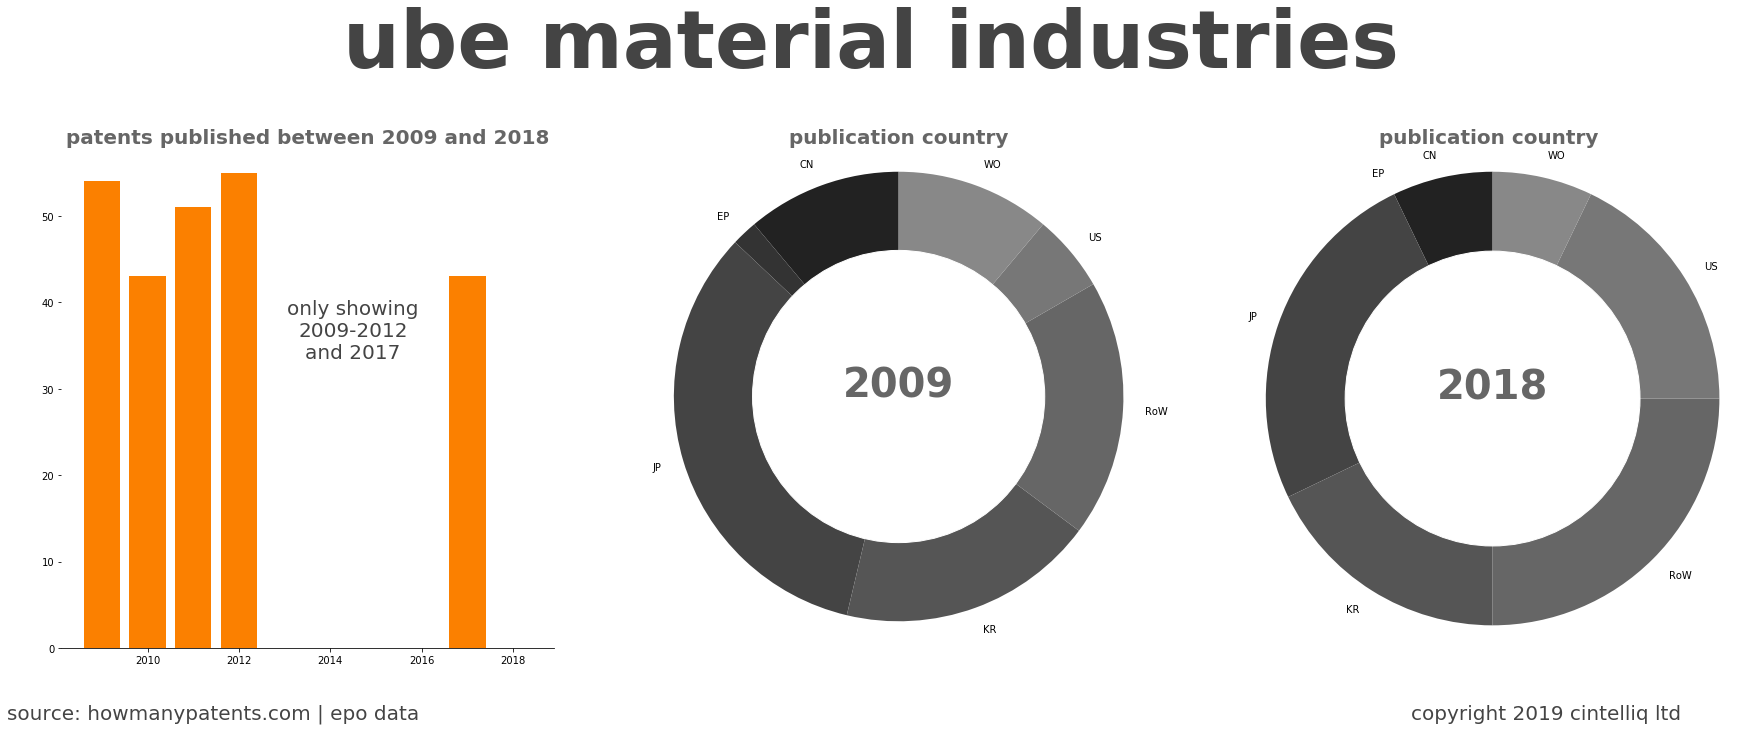 summary of patents for Ube Material Industries